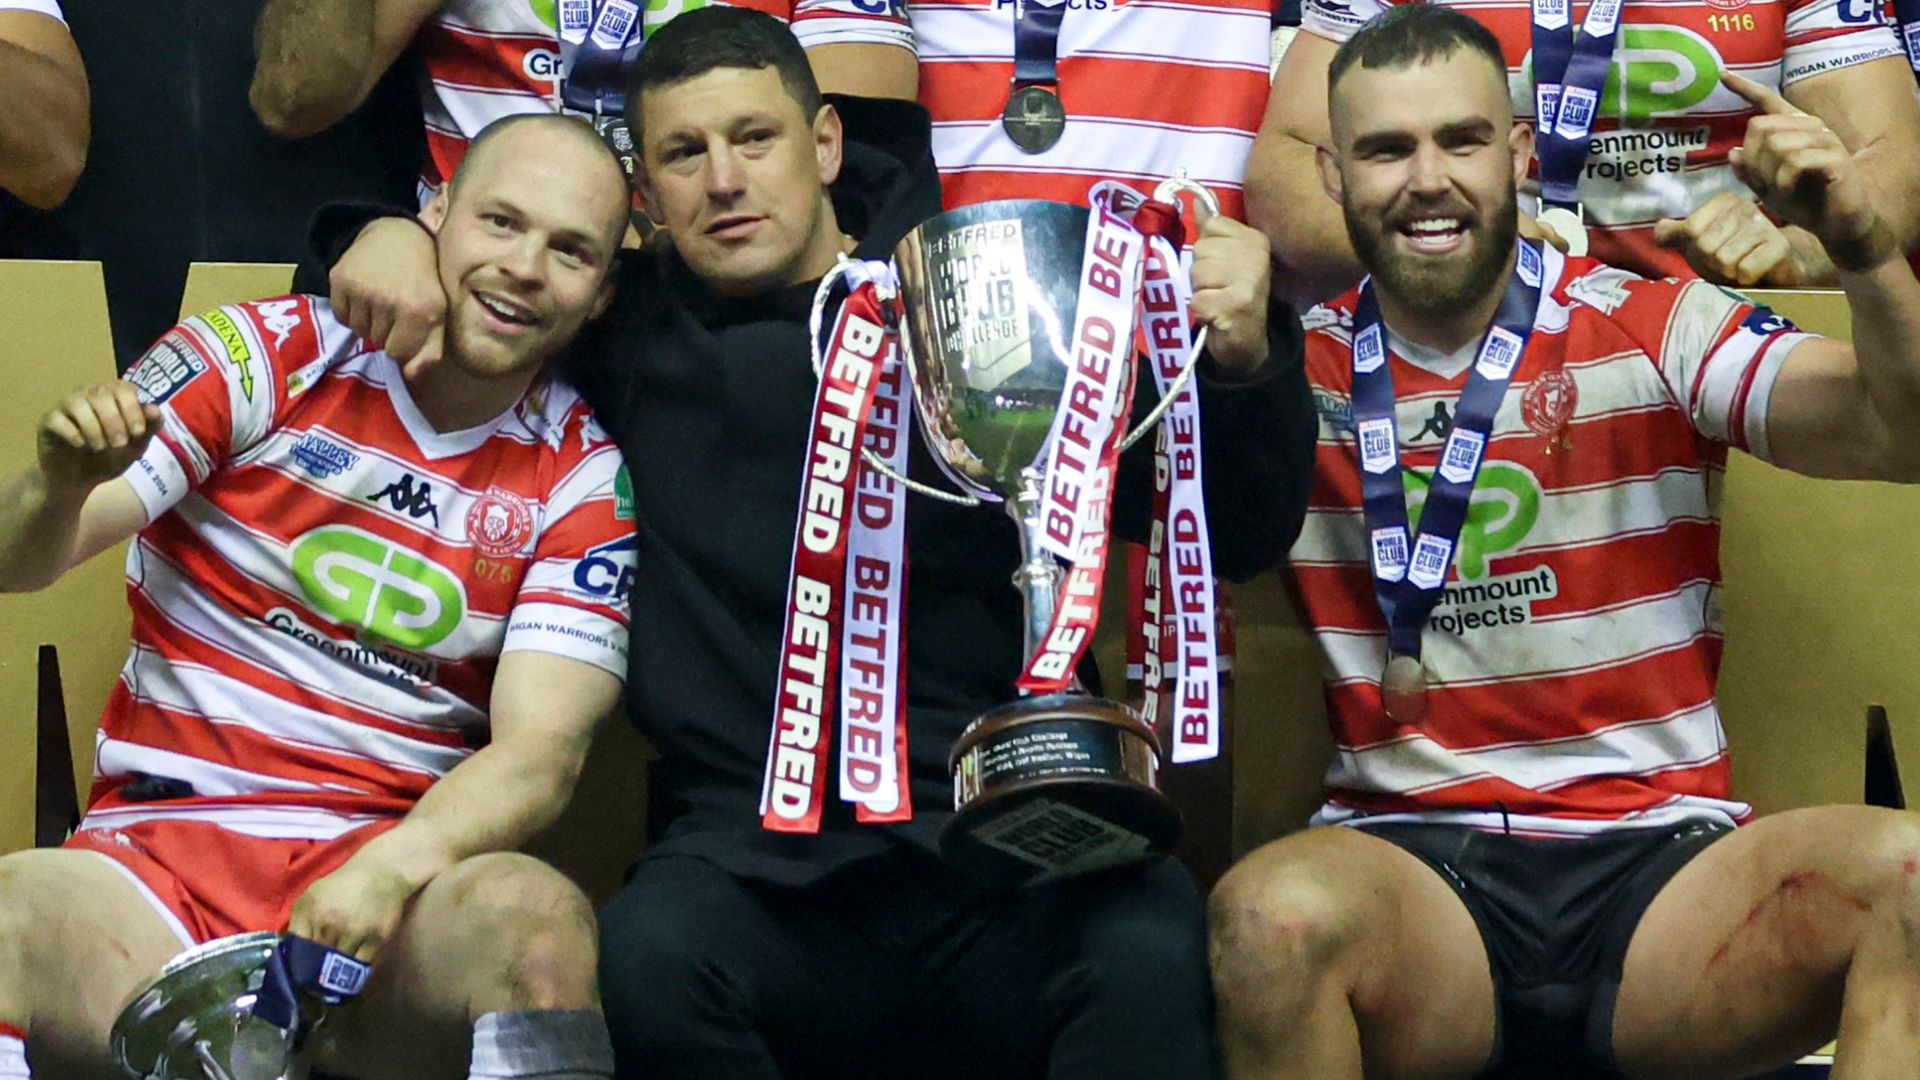 How Peet's Wigan conquered the rugby league world in 66 games